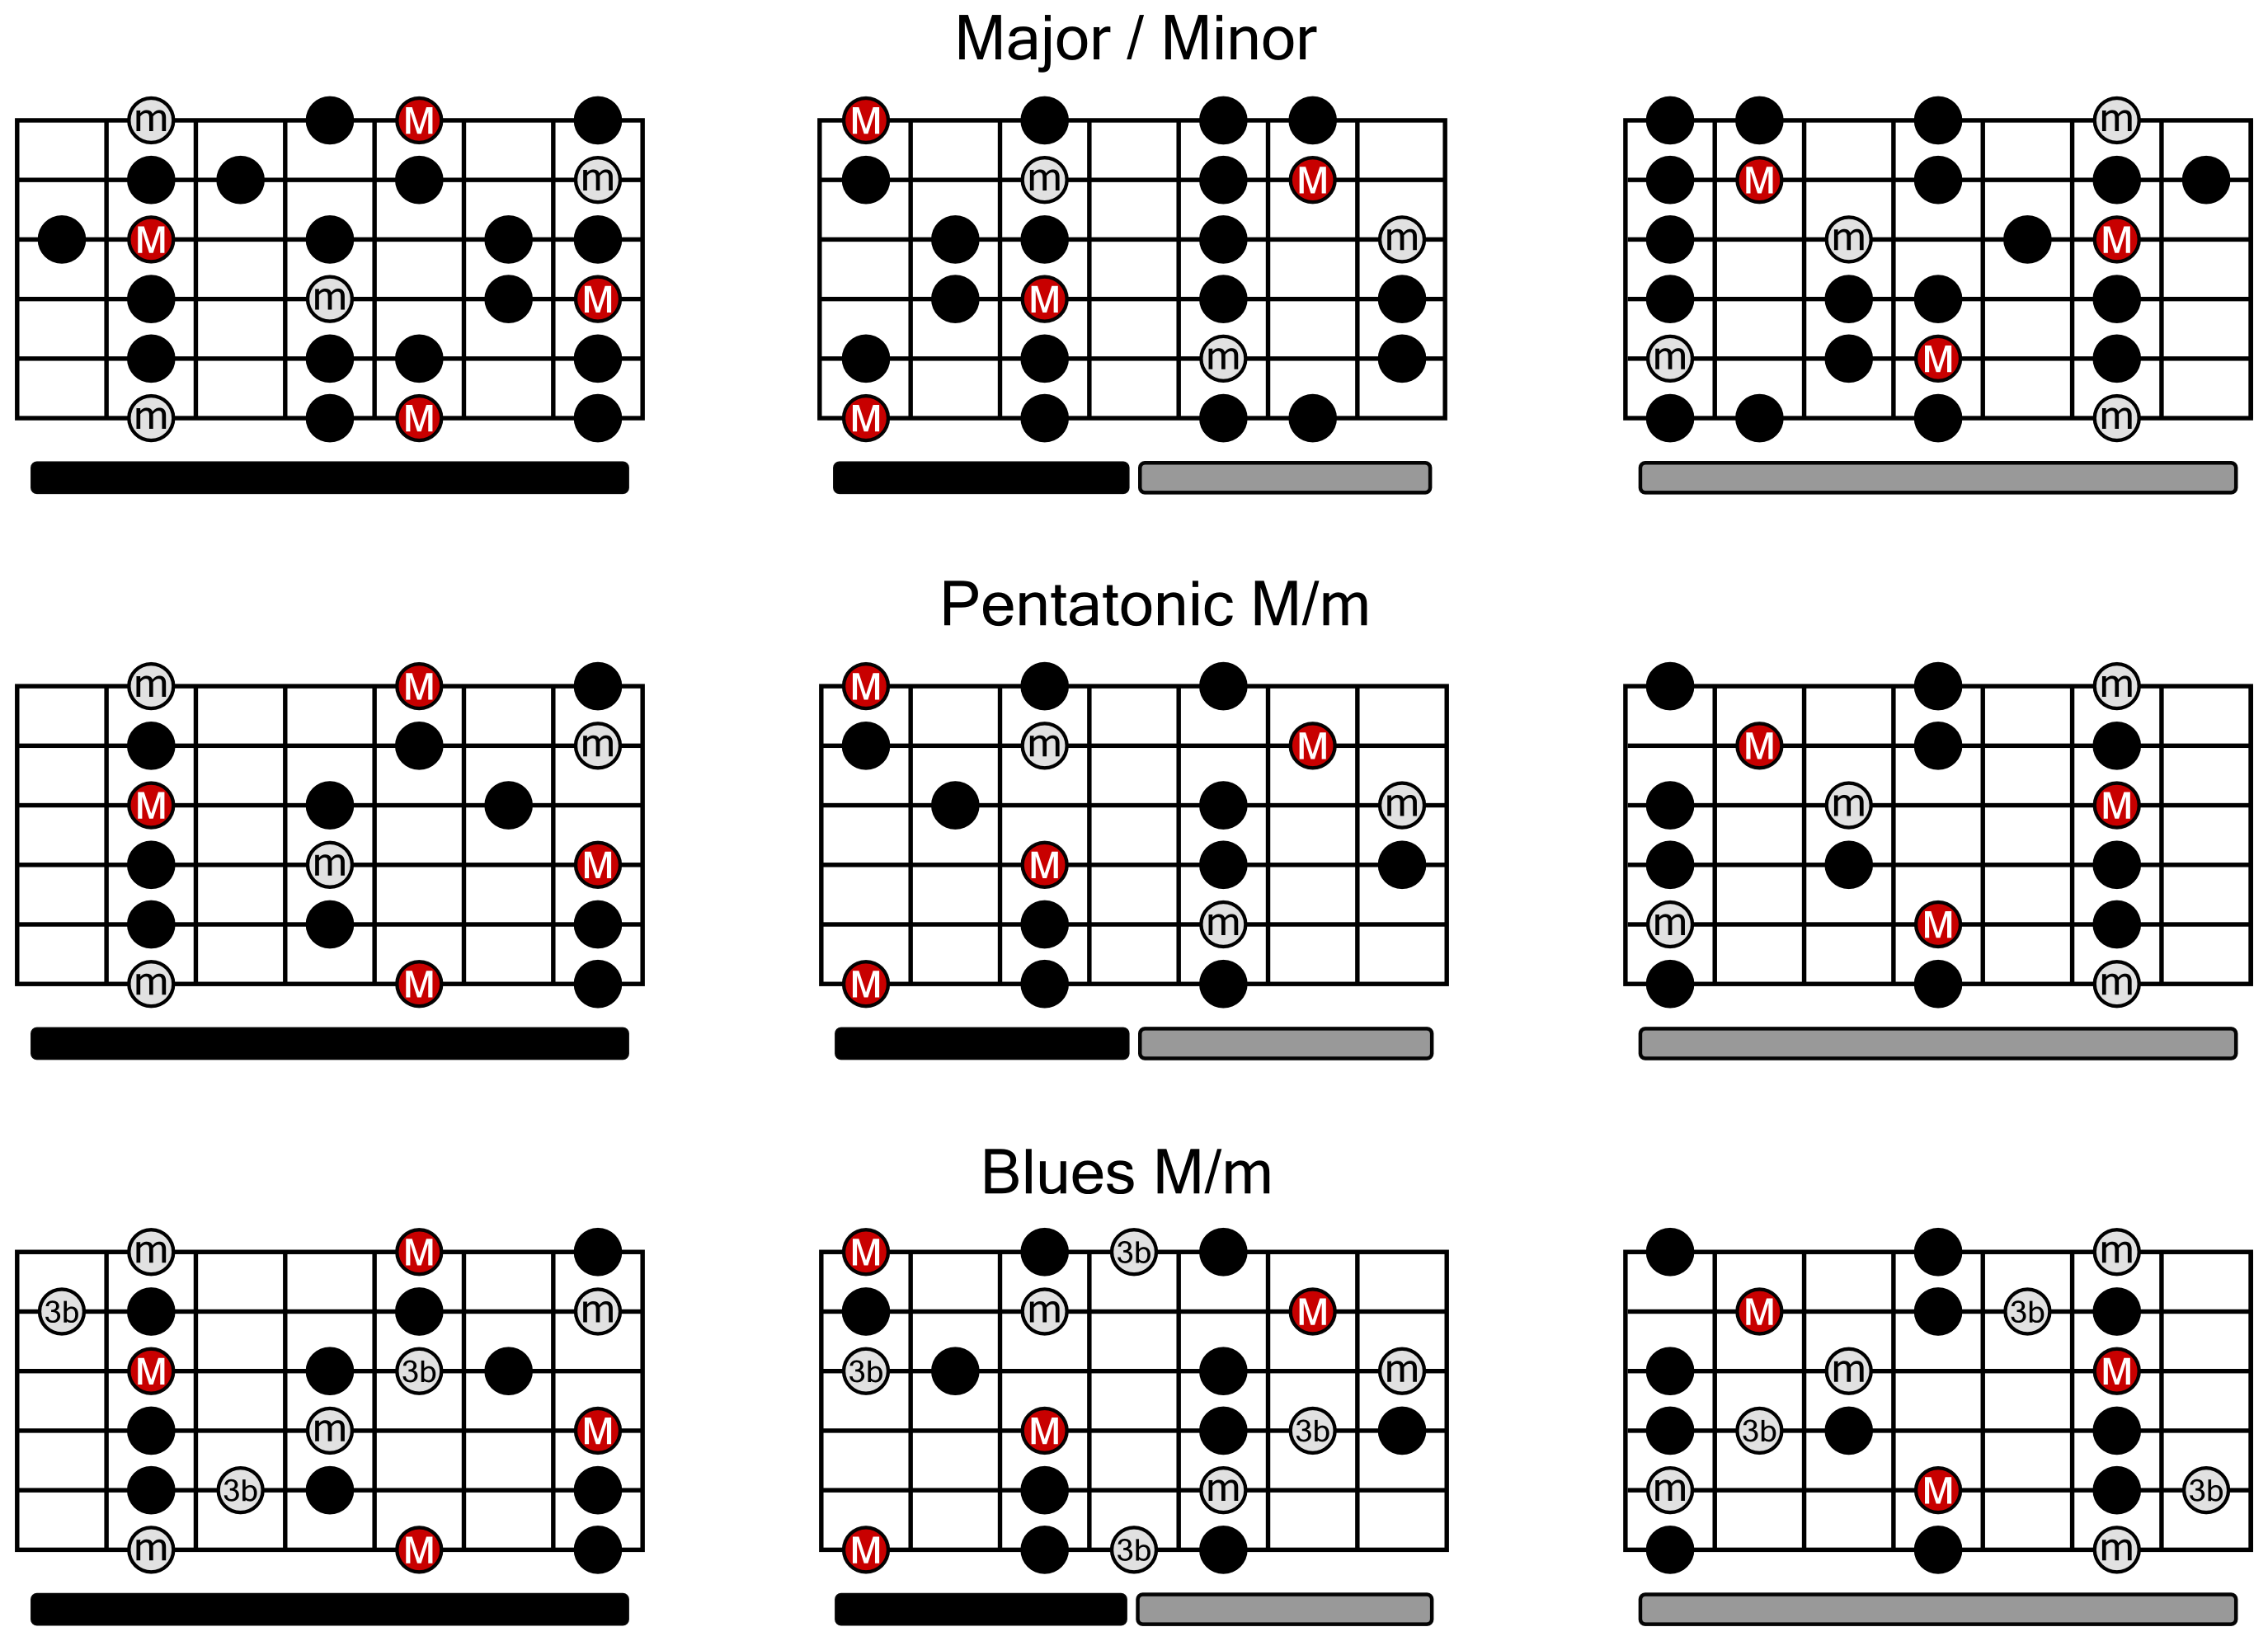 Guitar Scales Chart for Major/Minor, Blues Scales - TrueFire Blog Guitar Lessons